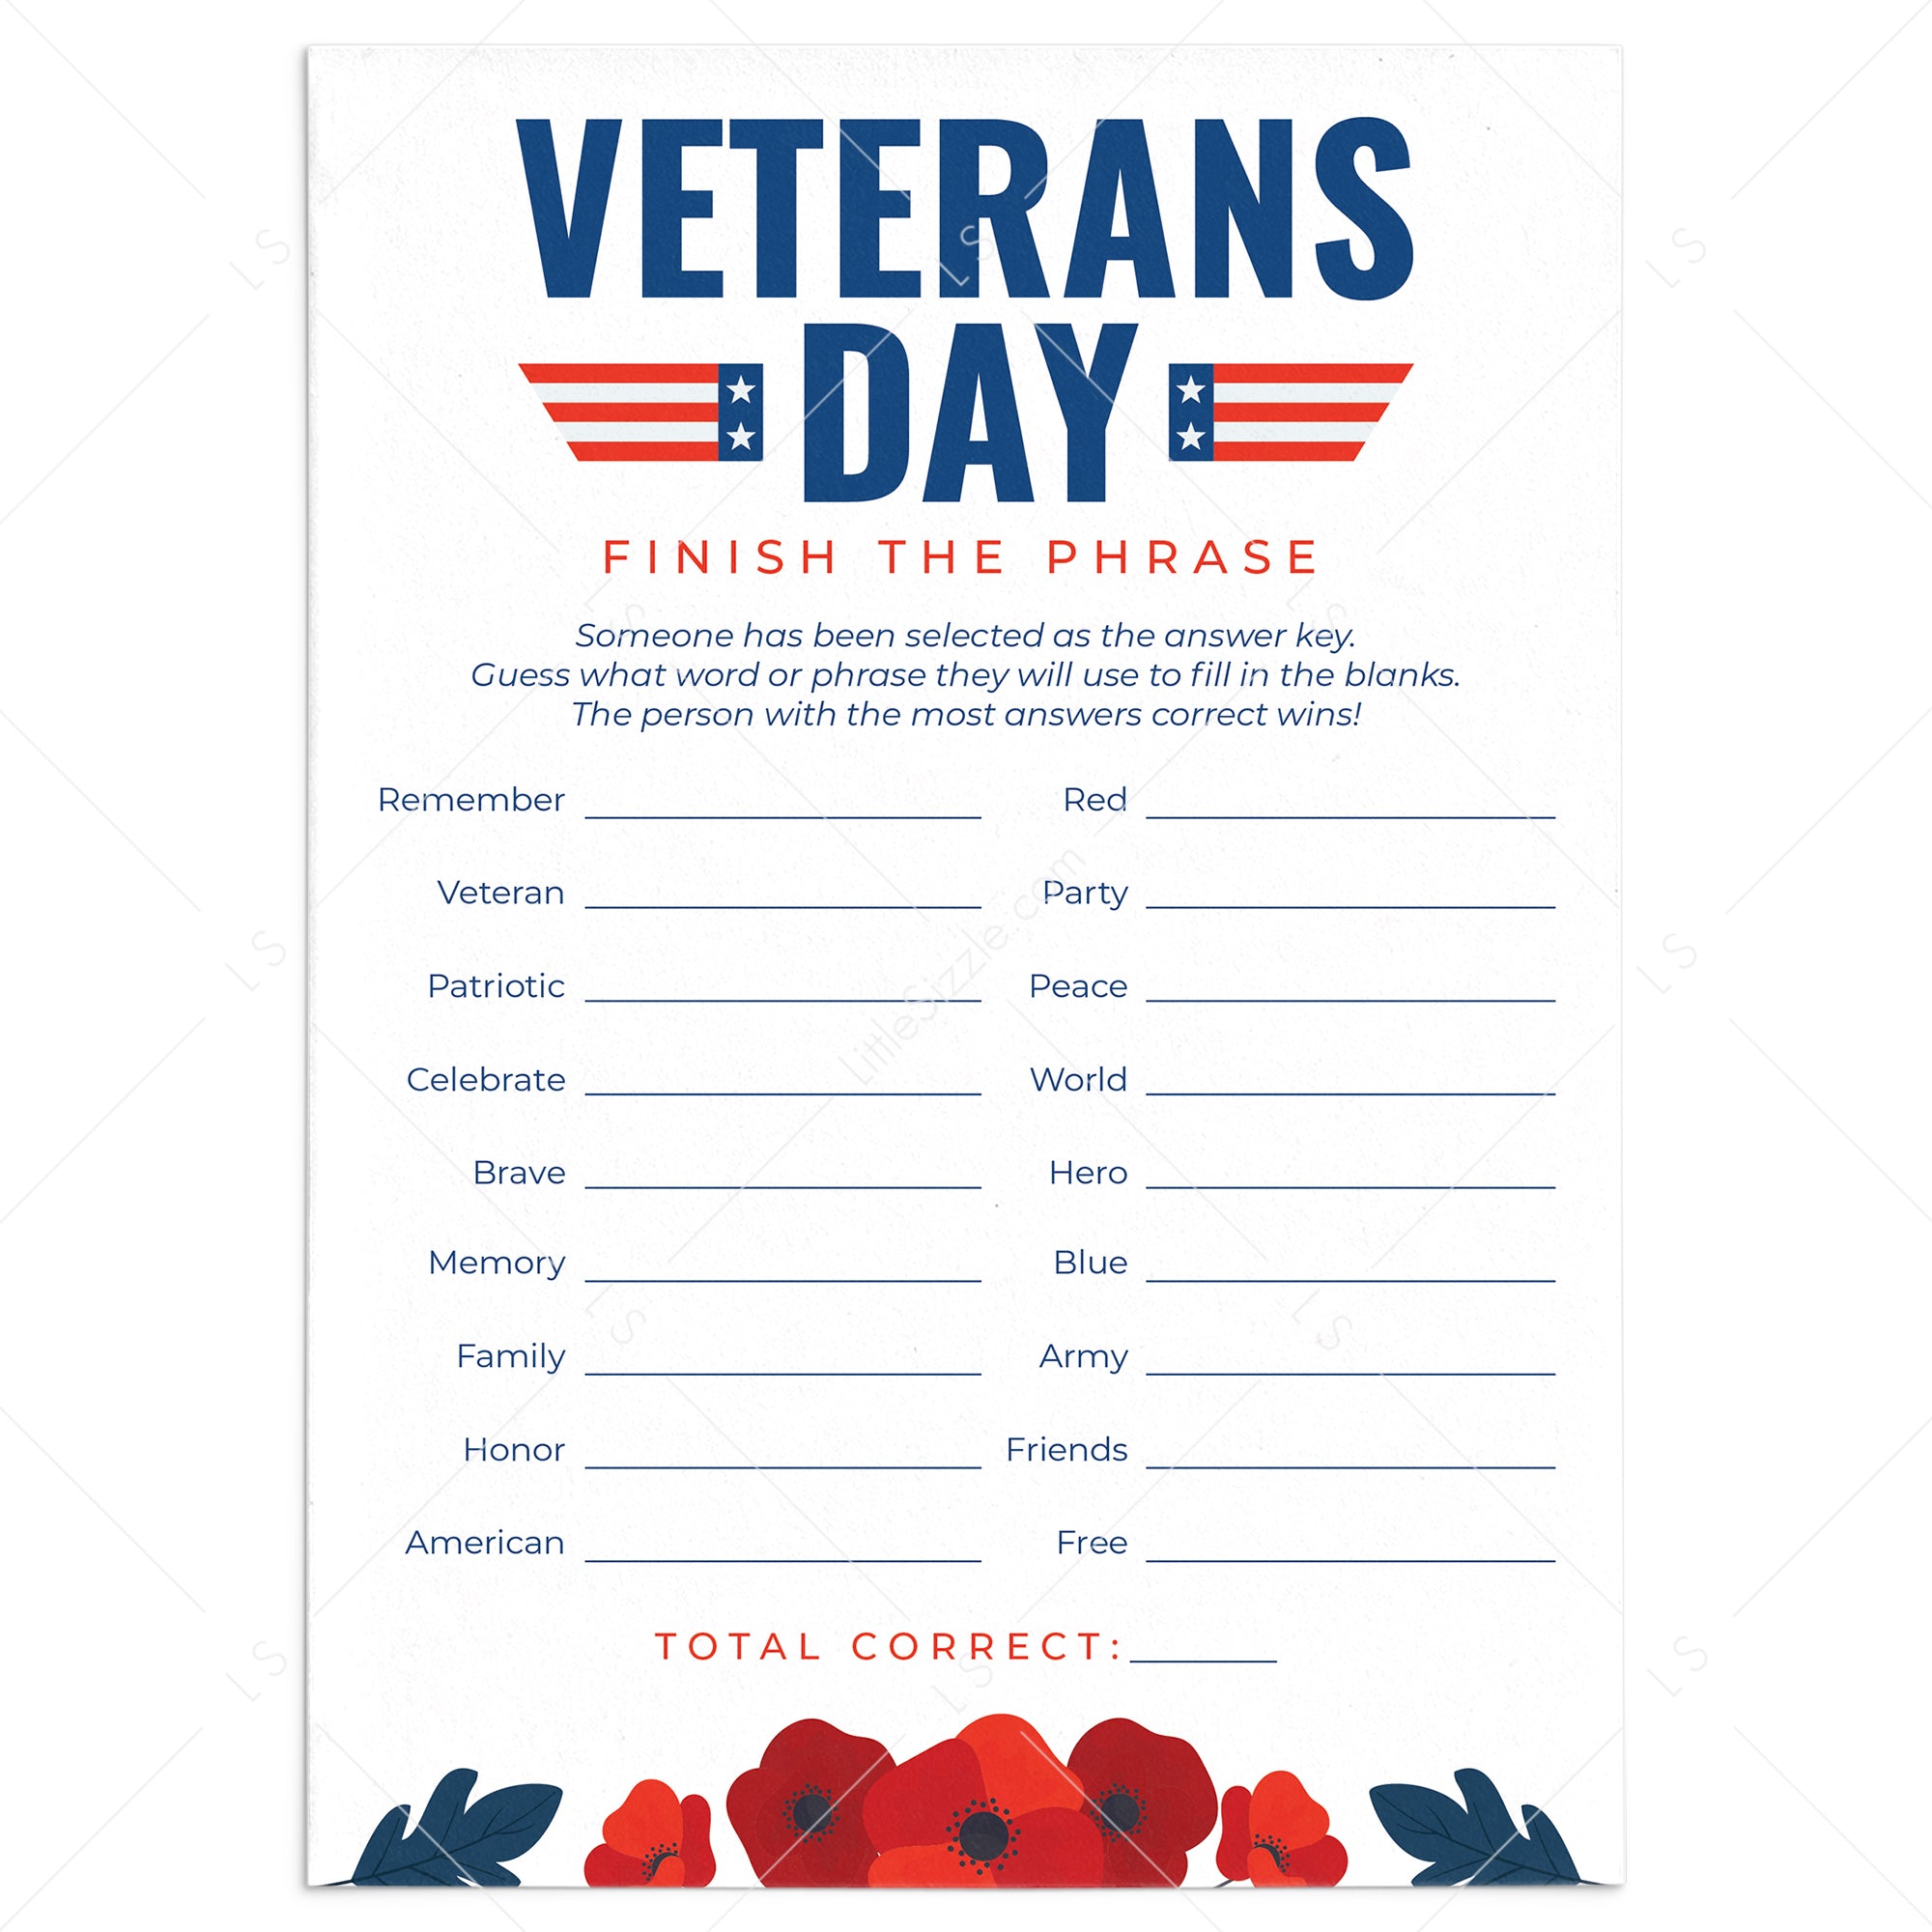 Veterans Day Group Activity Printable Finish The Phrase by LittleSizzle